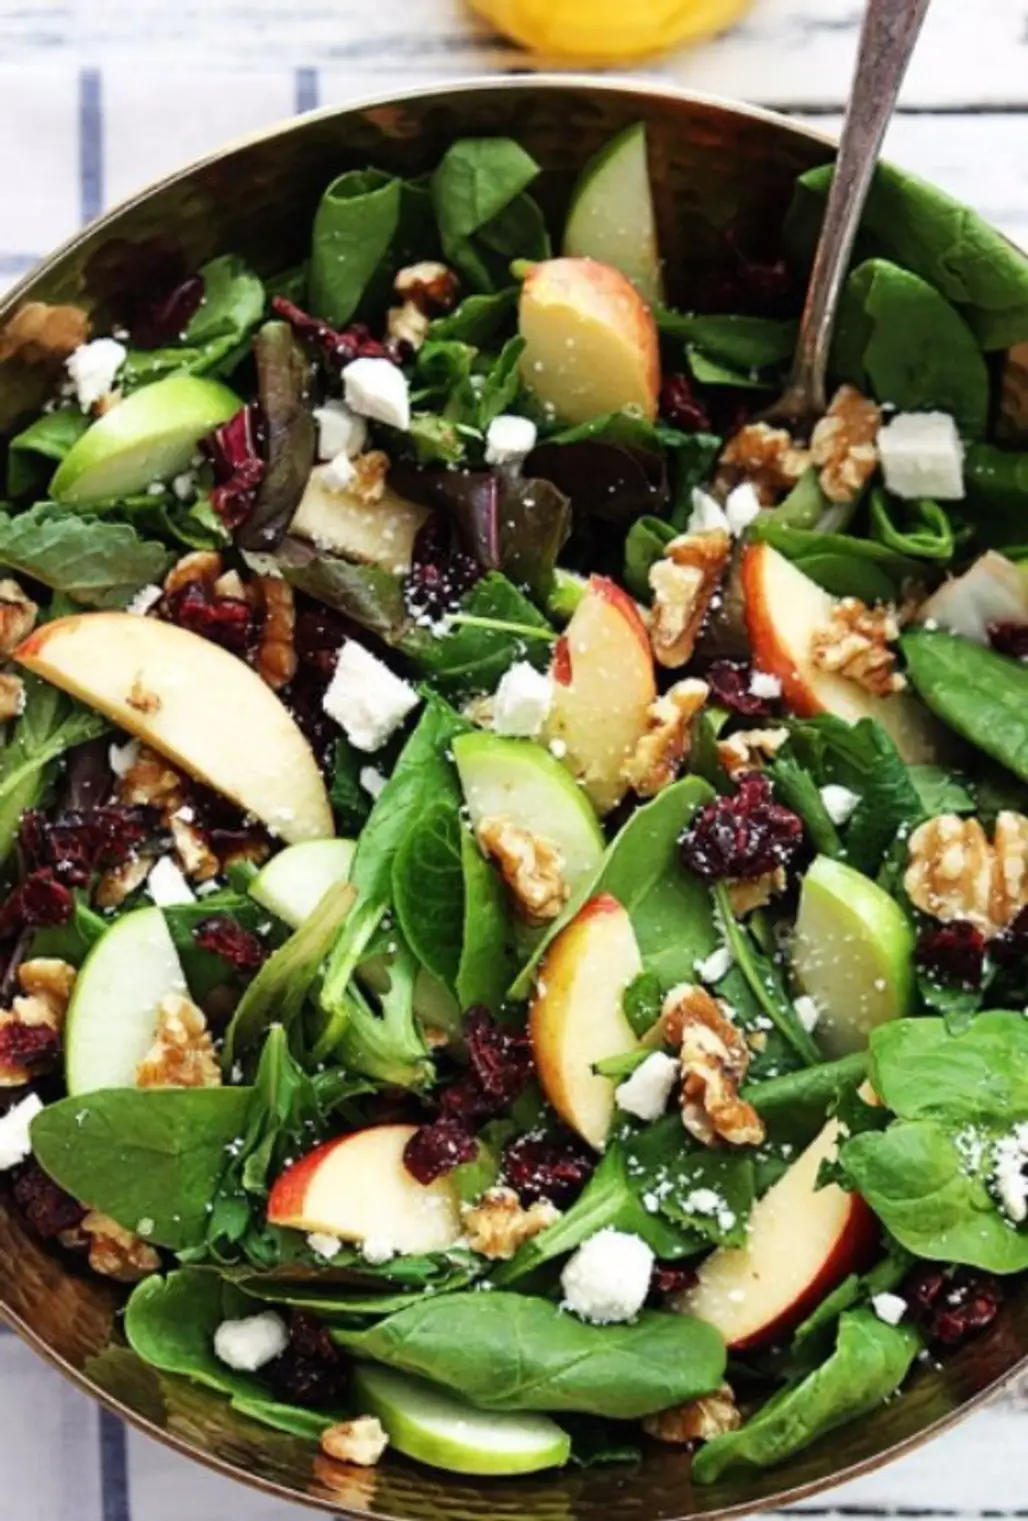 Crisp Apples, Dried Cranberries, Feta Cheese, and Hearty Walnuts